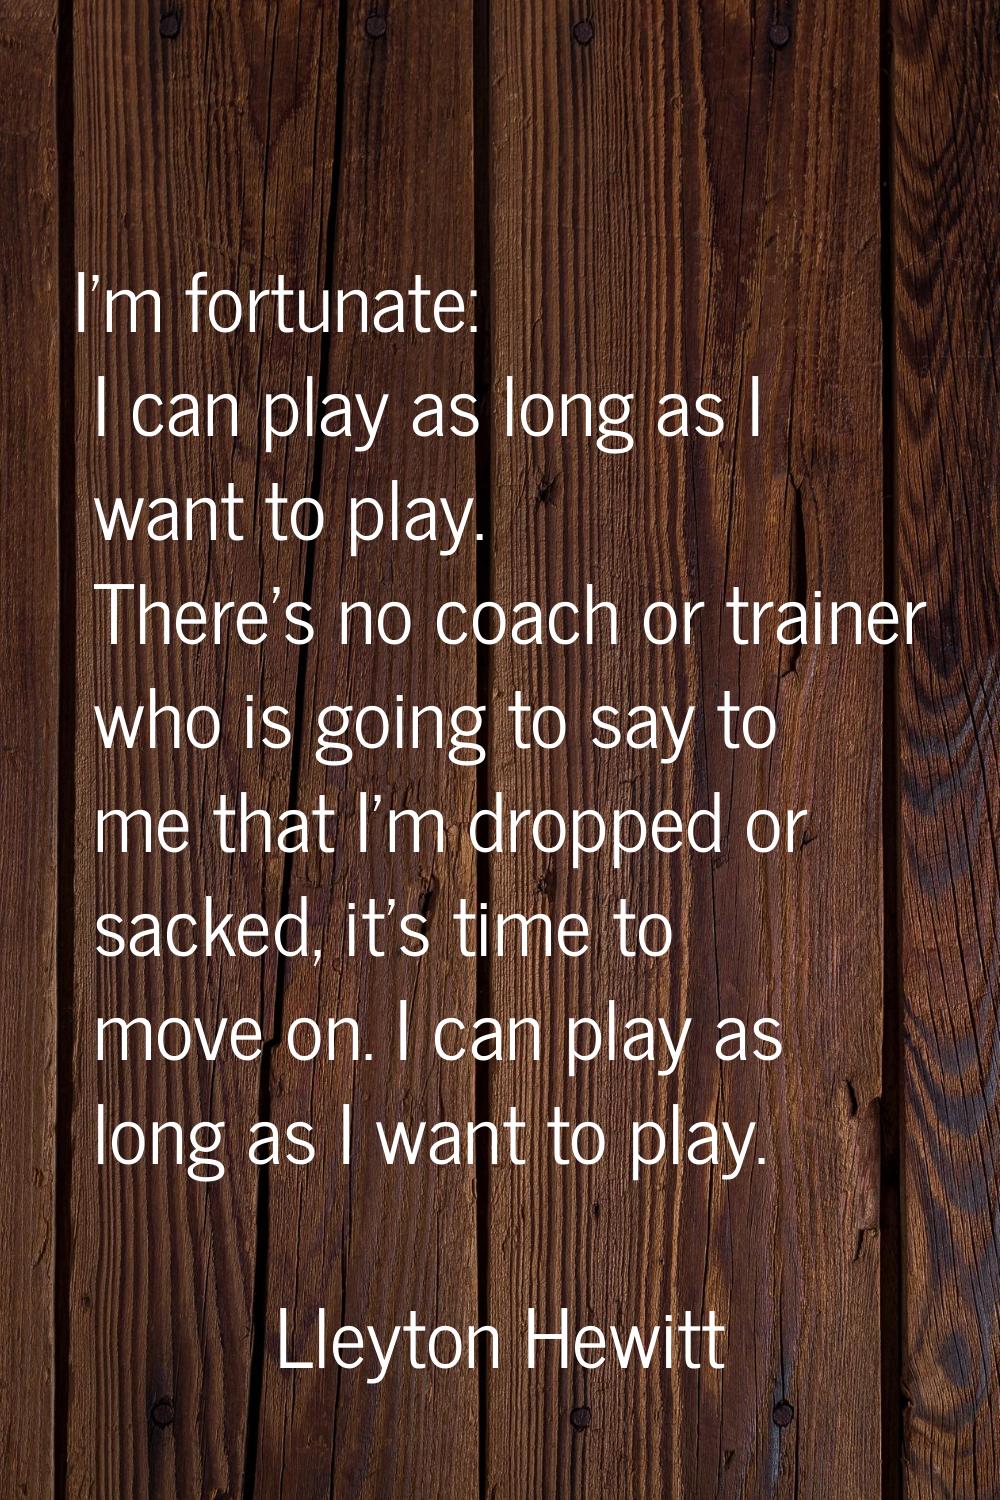 I'm fortunate: I can play as long as I want to play. There's no coach or trainer who is going to sa